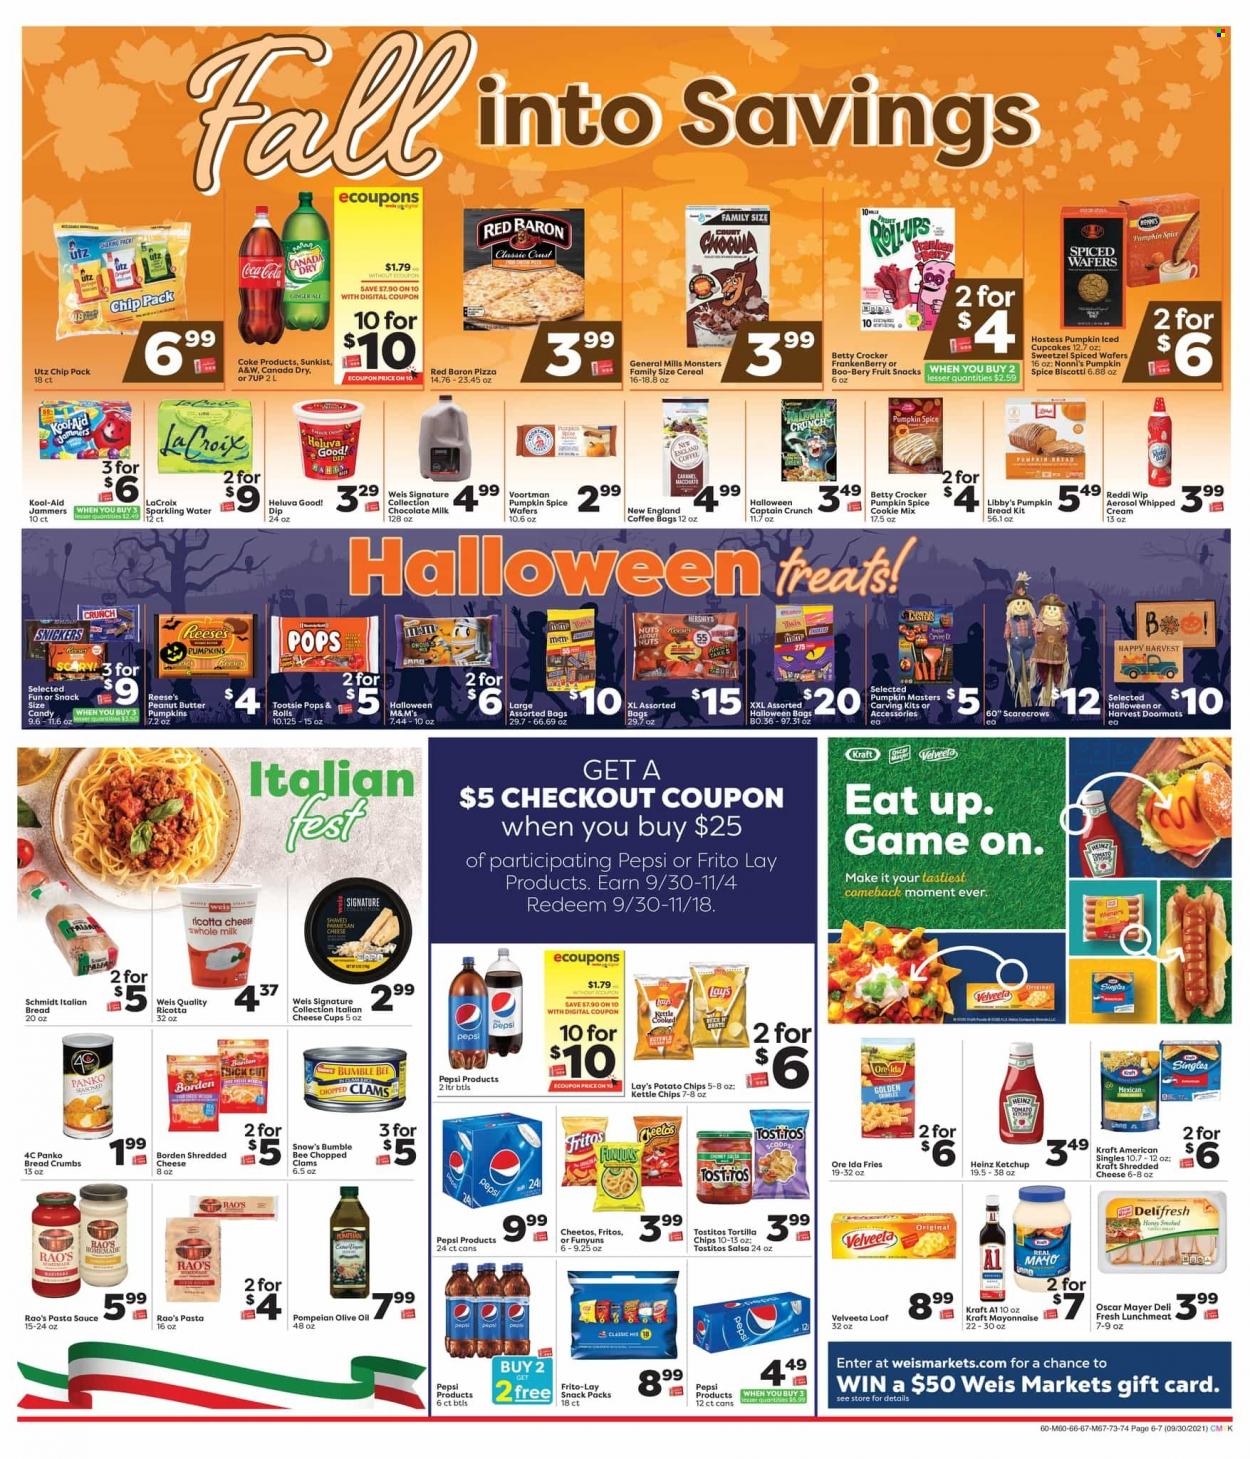 thumbnail - Weis Flyer - 09/30/2021 - 11/04/2021 - Sales products - cupcake, breadcrumbs, panko breadcrumbs, clams, pizza, pasta sauce, Bumble Bee, sauce, Kraft®, Oscar Mayer, ricotta, shredded cheese, cheese cup, Kraft Singles, milk, whipped cream, mayonnaise, dip, Reese's, Hershey's, potato fries, Ore-Ida, Red Baron, biscotti, milk chocolate, wafers, chocolate, Snickers, Twix, M&M's, fruit snack, Fritos, tortilla chips, potato chips, Cheetos, chips, Lay’s, Frito-Lay, Tostitos, Heinz, cereals, spice, ketchup, salsa, olive oil, oil, peanut butter, Canada Dry, Coca-Cola, ginger ale, Pepsi, 7UP, A&W, sparkling water, coffee, cup. Page 6.